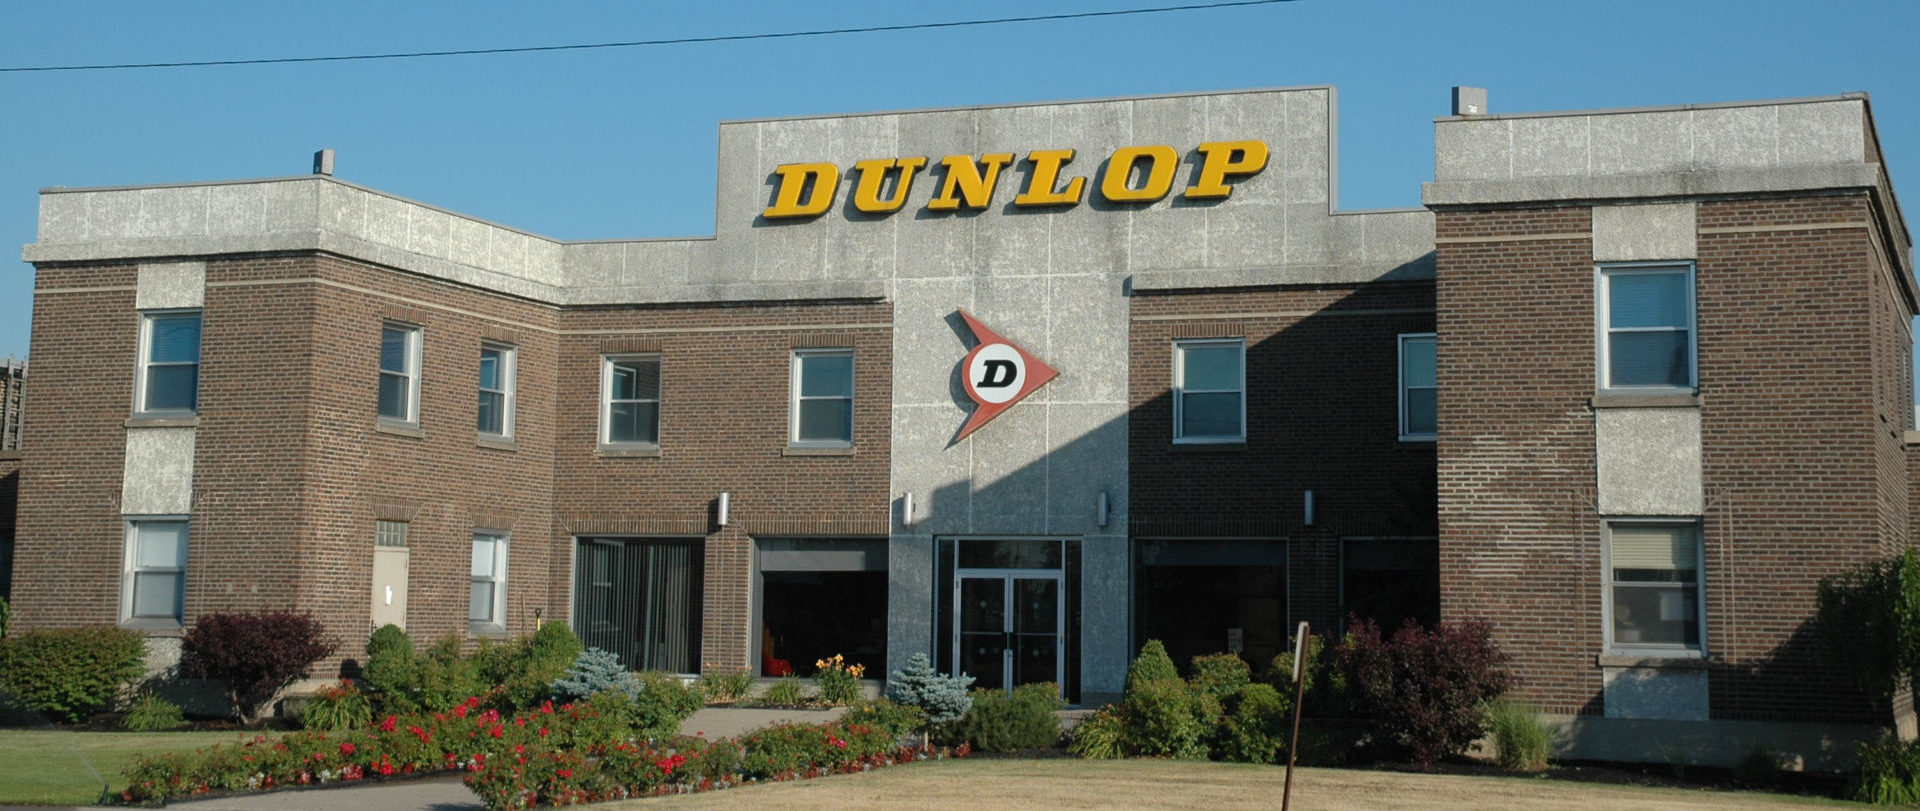 16-facts-about-dunlop